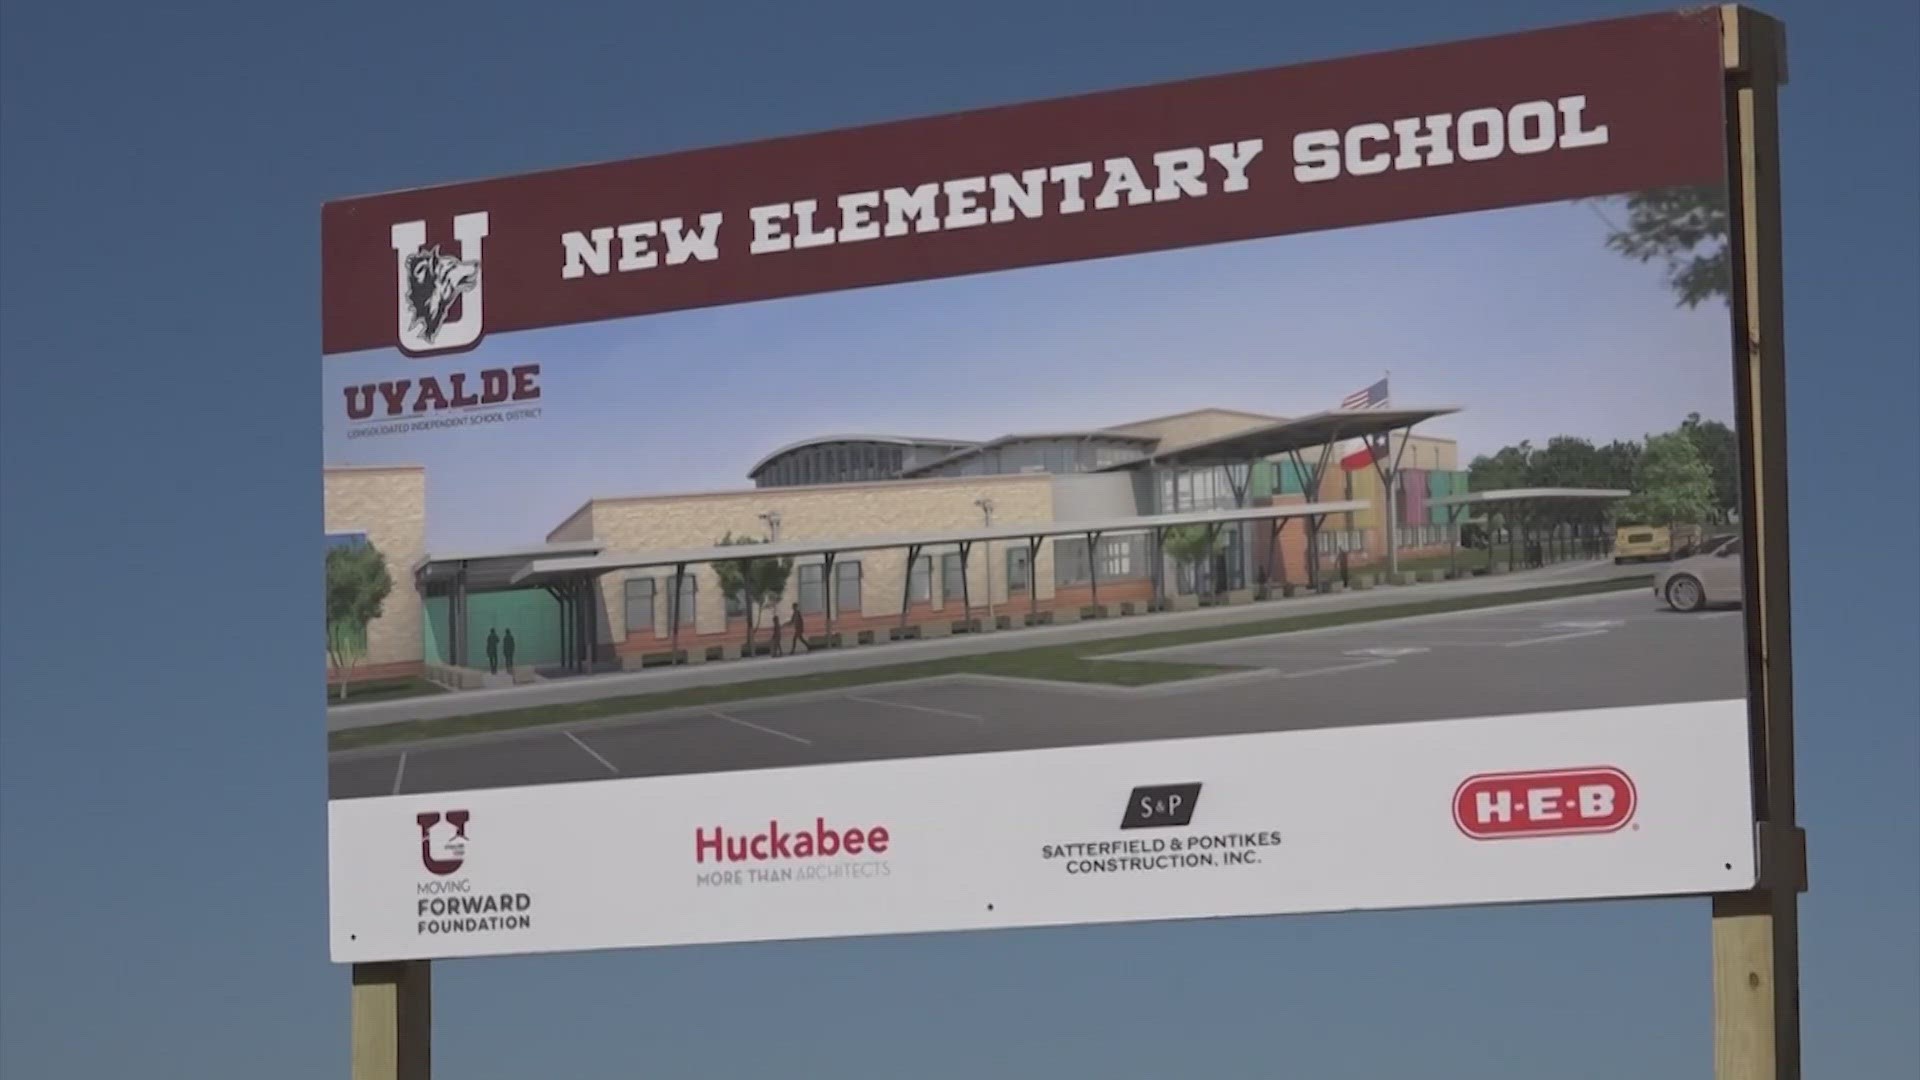 The $60 million project is happening after fundraising helped kickstart construction.